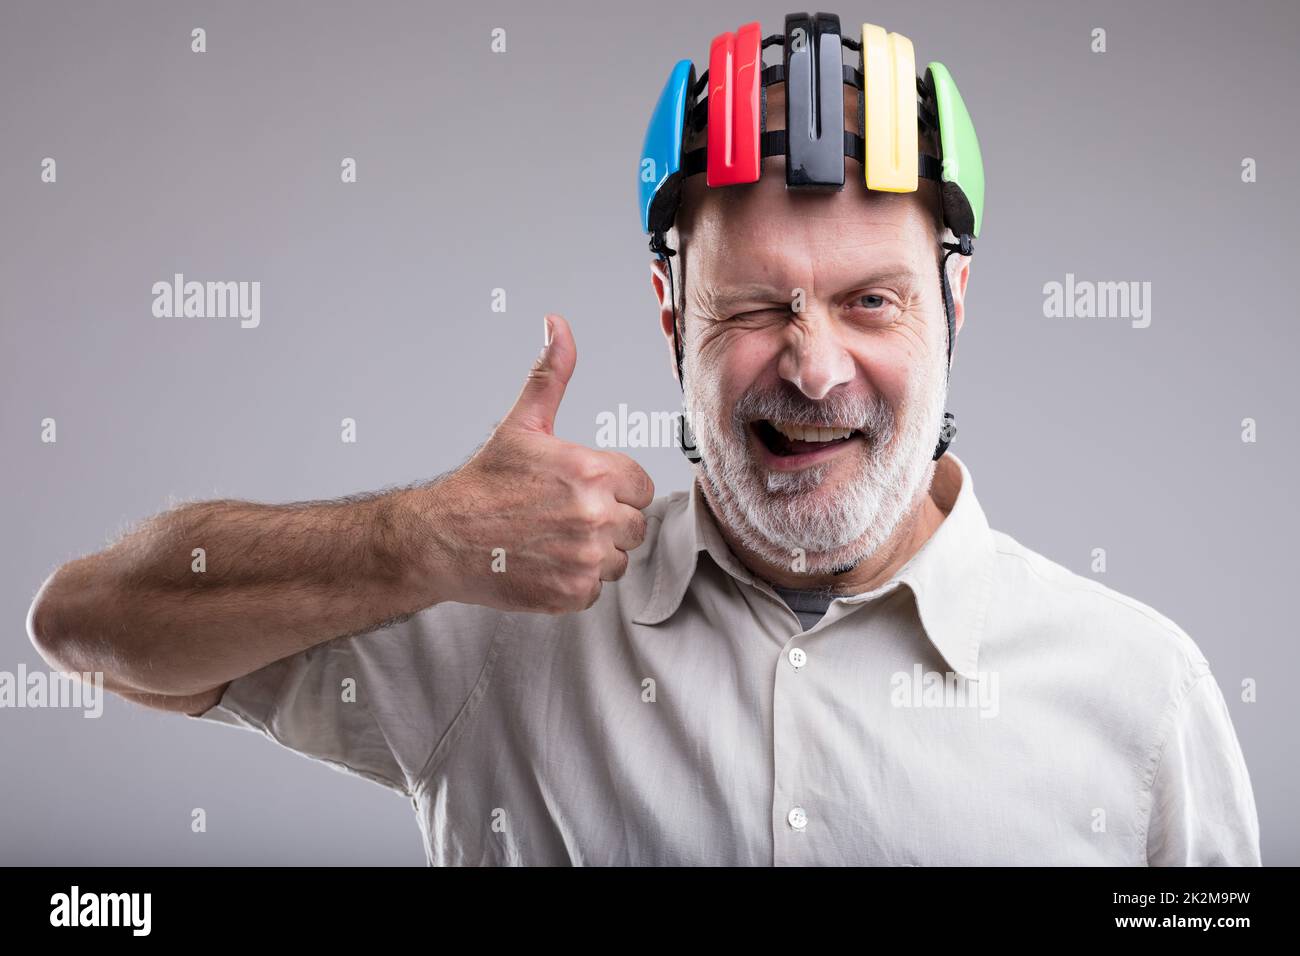 old man with bicicle head protection Stock Photo